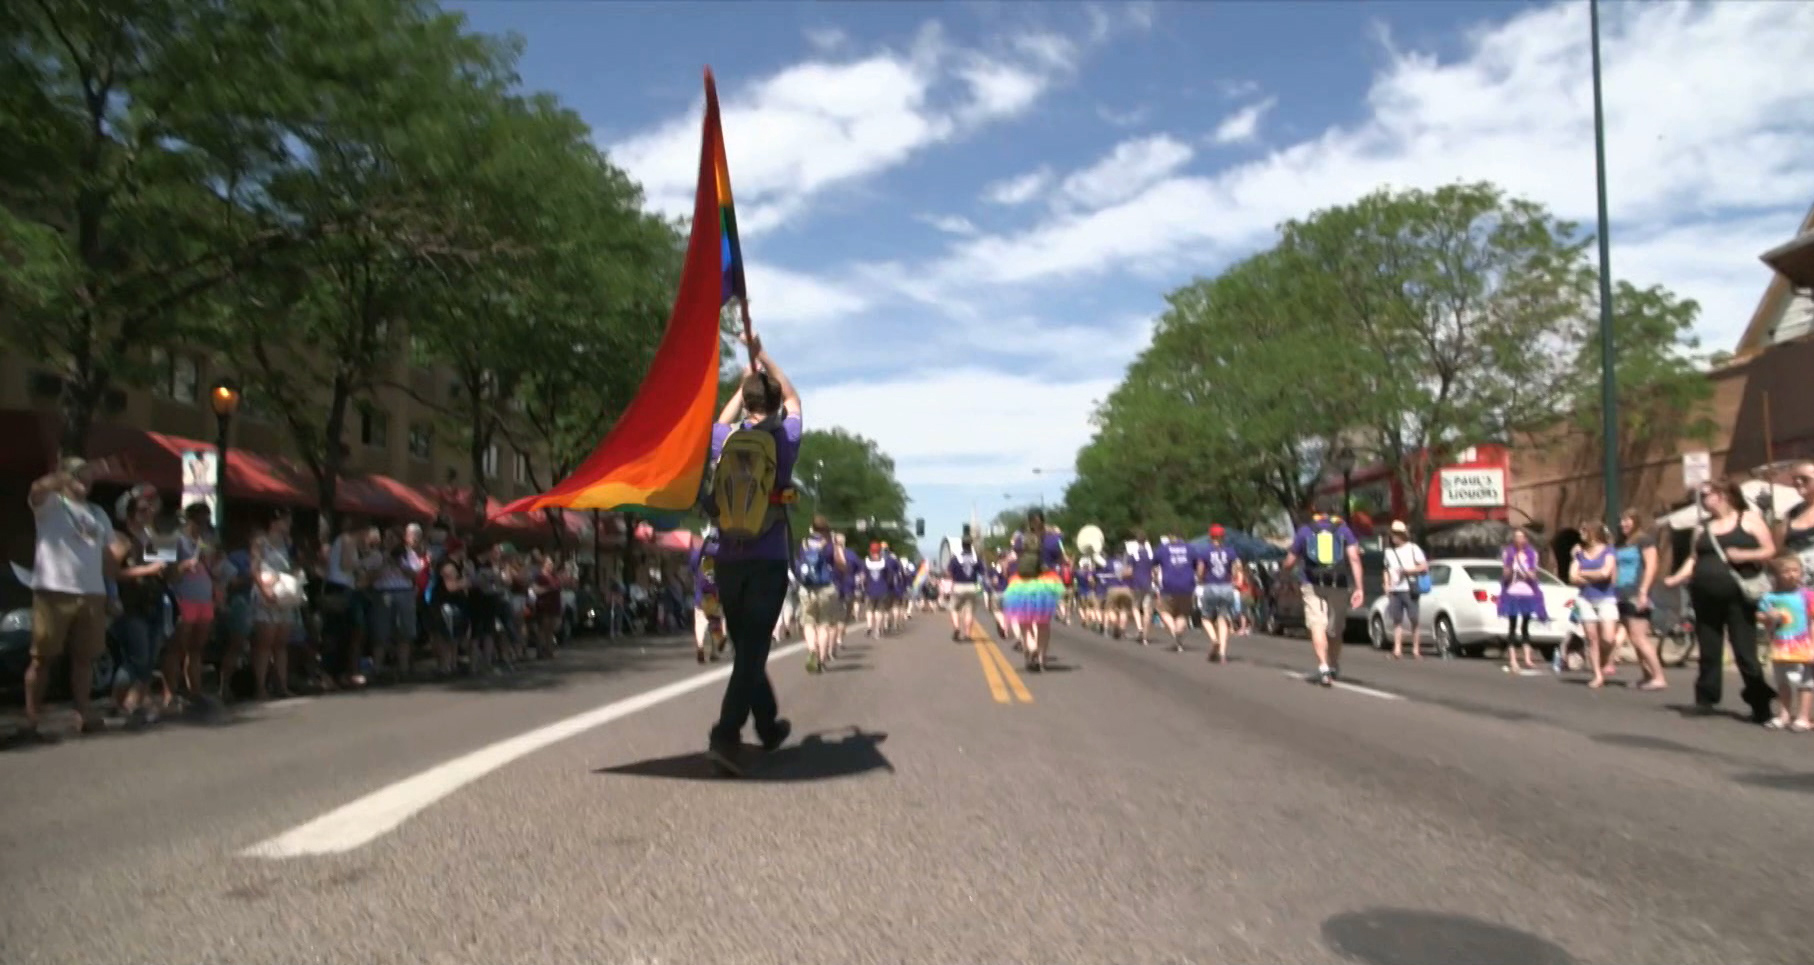 Colorado PrideFest takes on extra significance after Orlando massacre